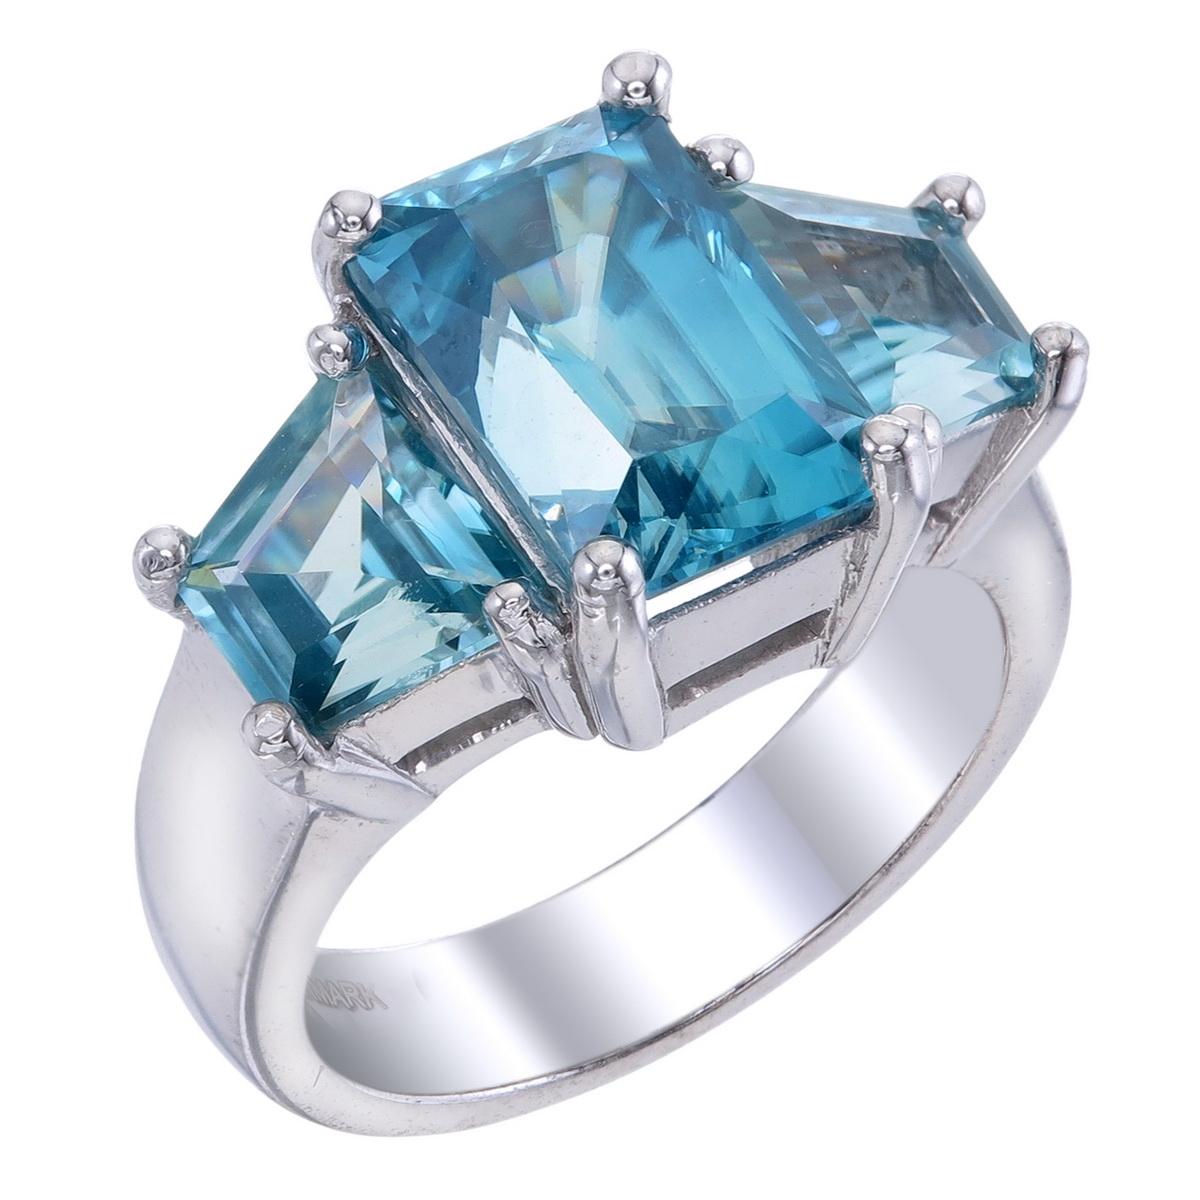 Orloff of Denmark; Natural Ocean Blue Zircon, Three-Stone ring set in 925 Sterling Silver.

Featured on this piece are three natural Cambodian blue zircons.
Occupying center-stage is a 6.76 carat ocean blue zircon full of shine and sparkle.
Two